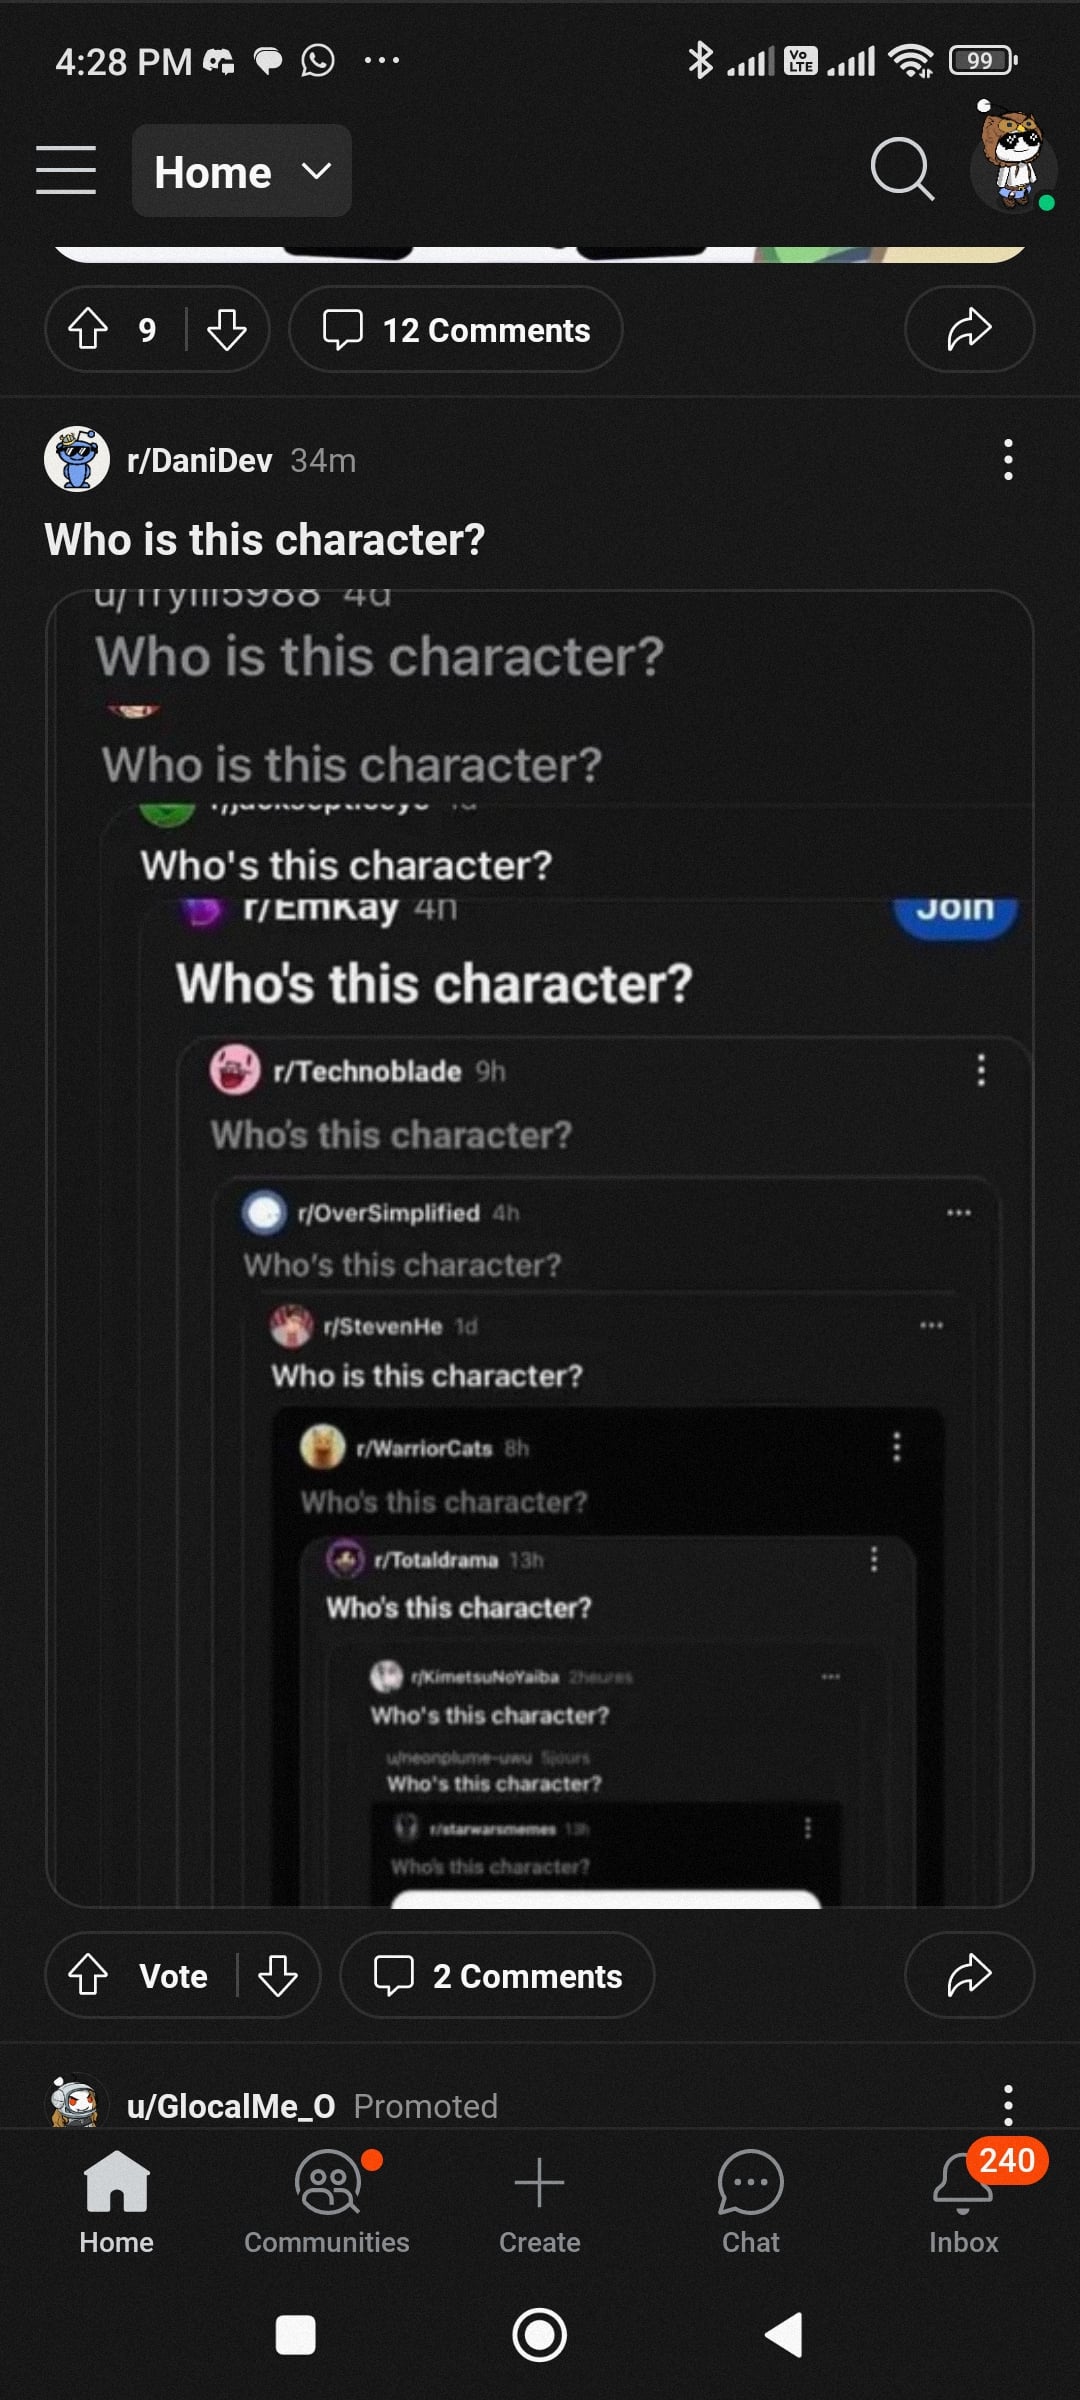 Minecraft Memes - "Who's dat character?"